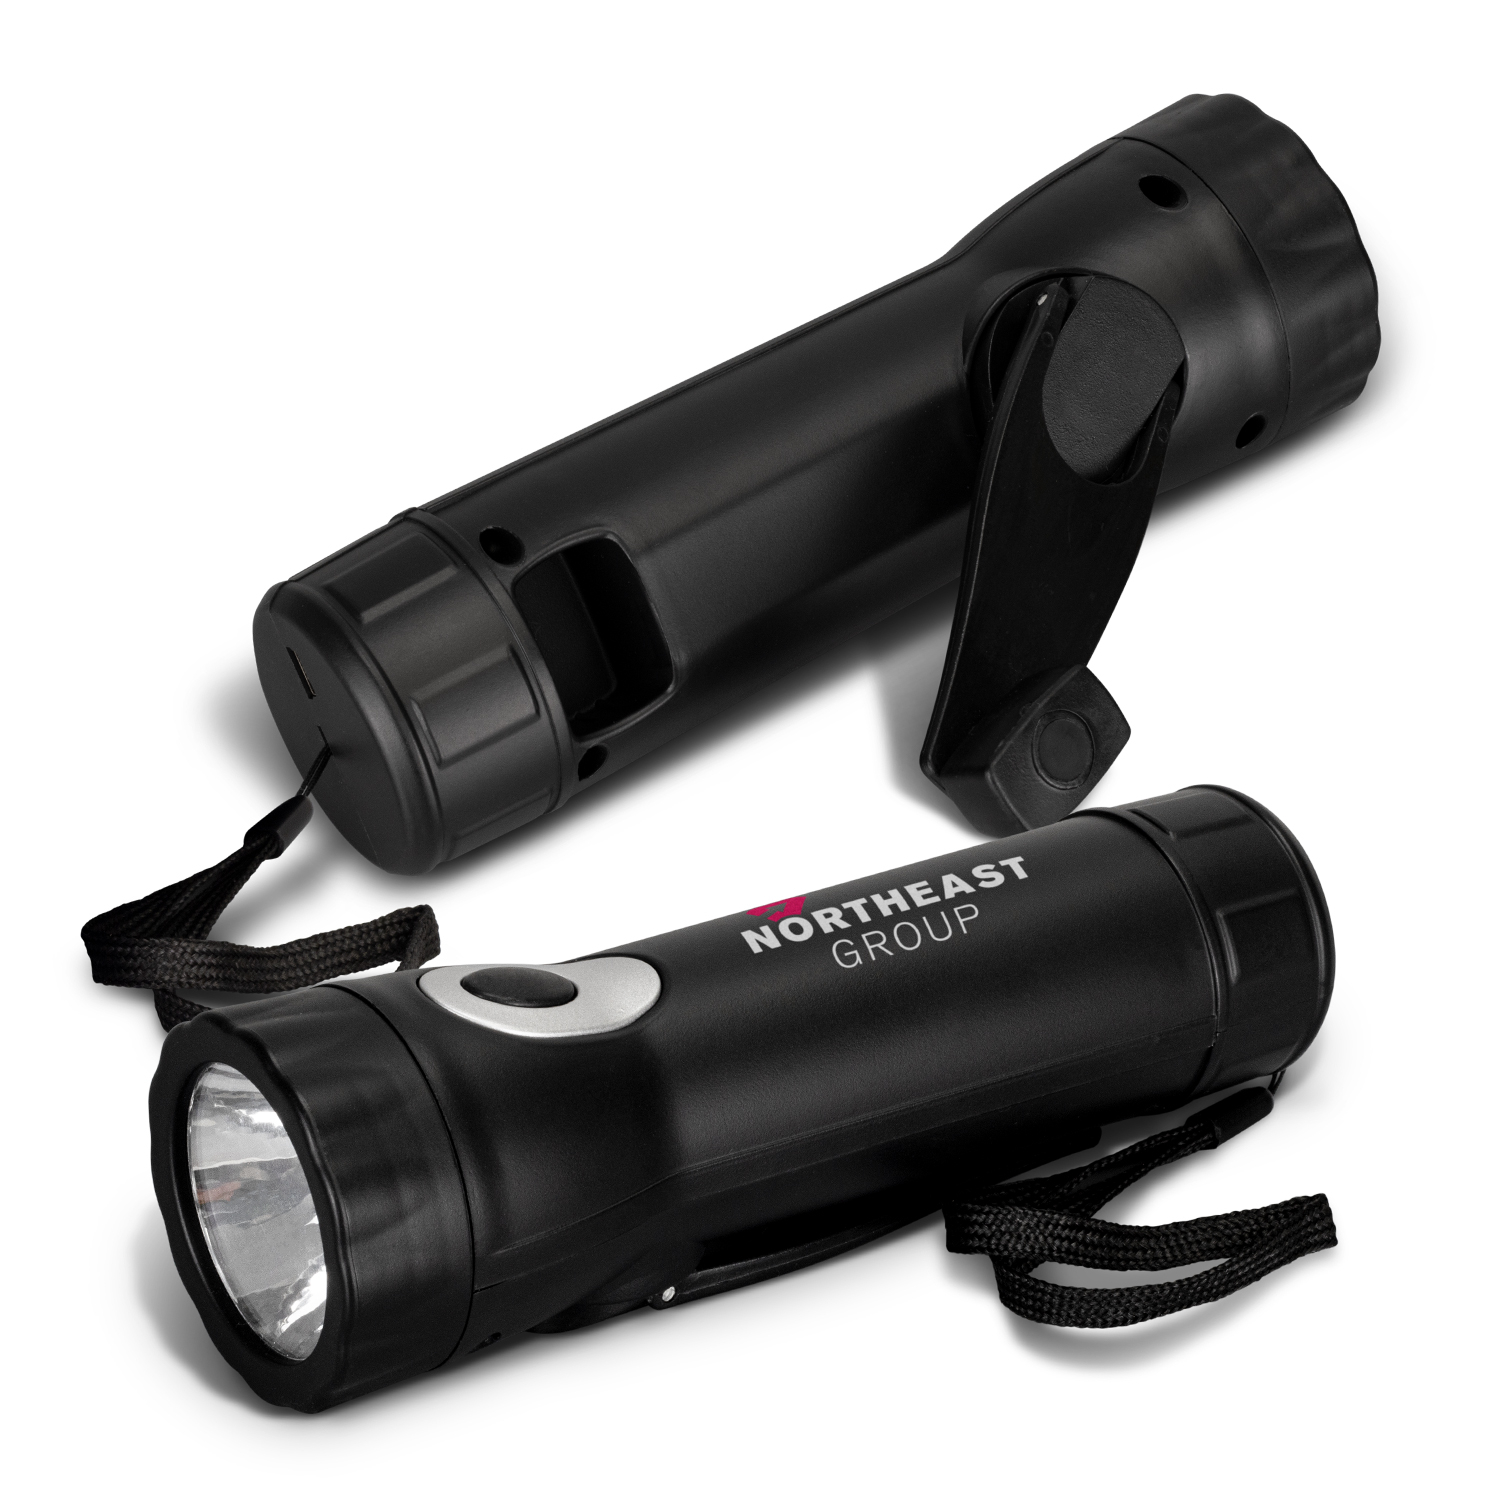 Camping & Outdoors Dynamo Rechargeable Torch Dynamo